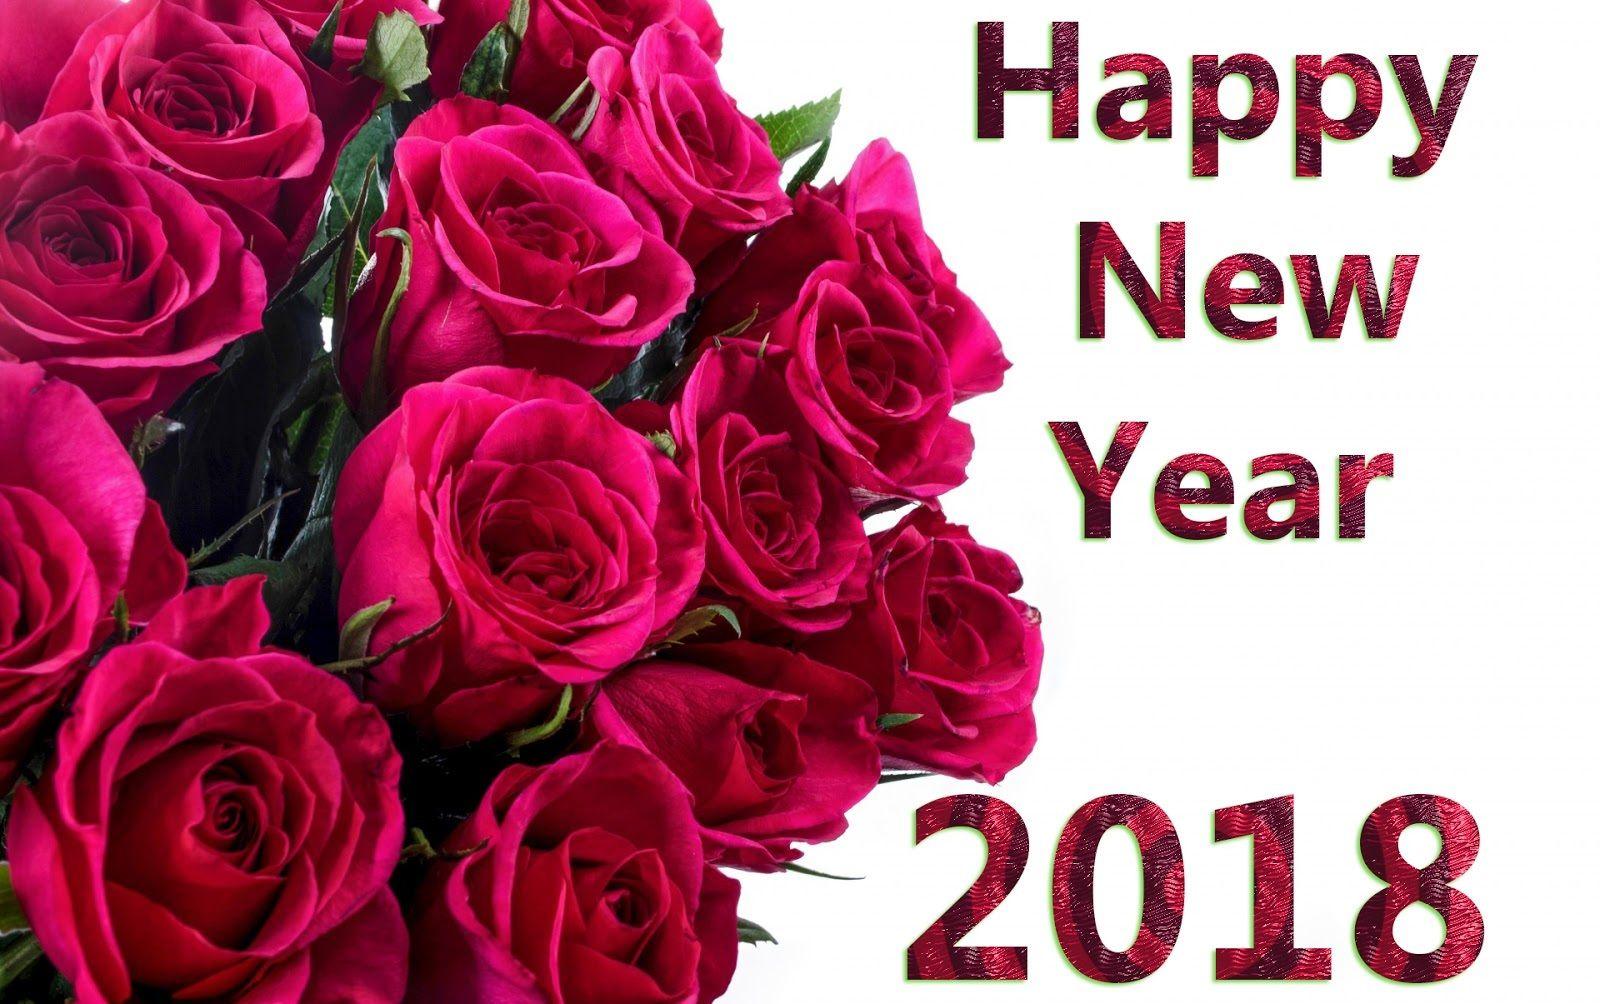 Happy New Year 2018 Image. Happy New Year 2018 Wishes. Image